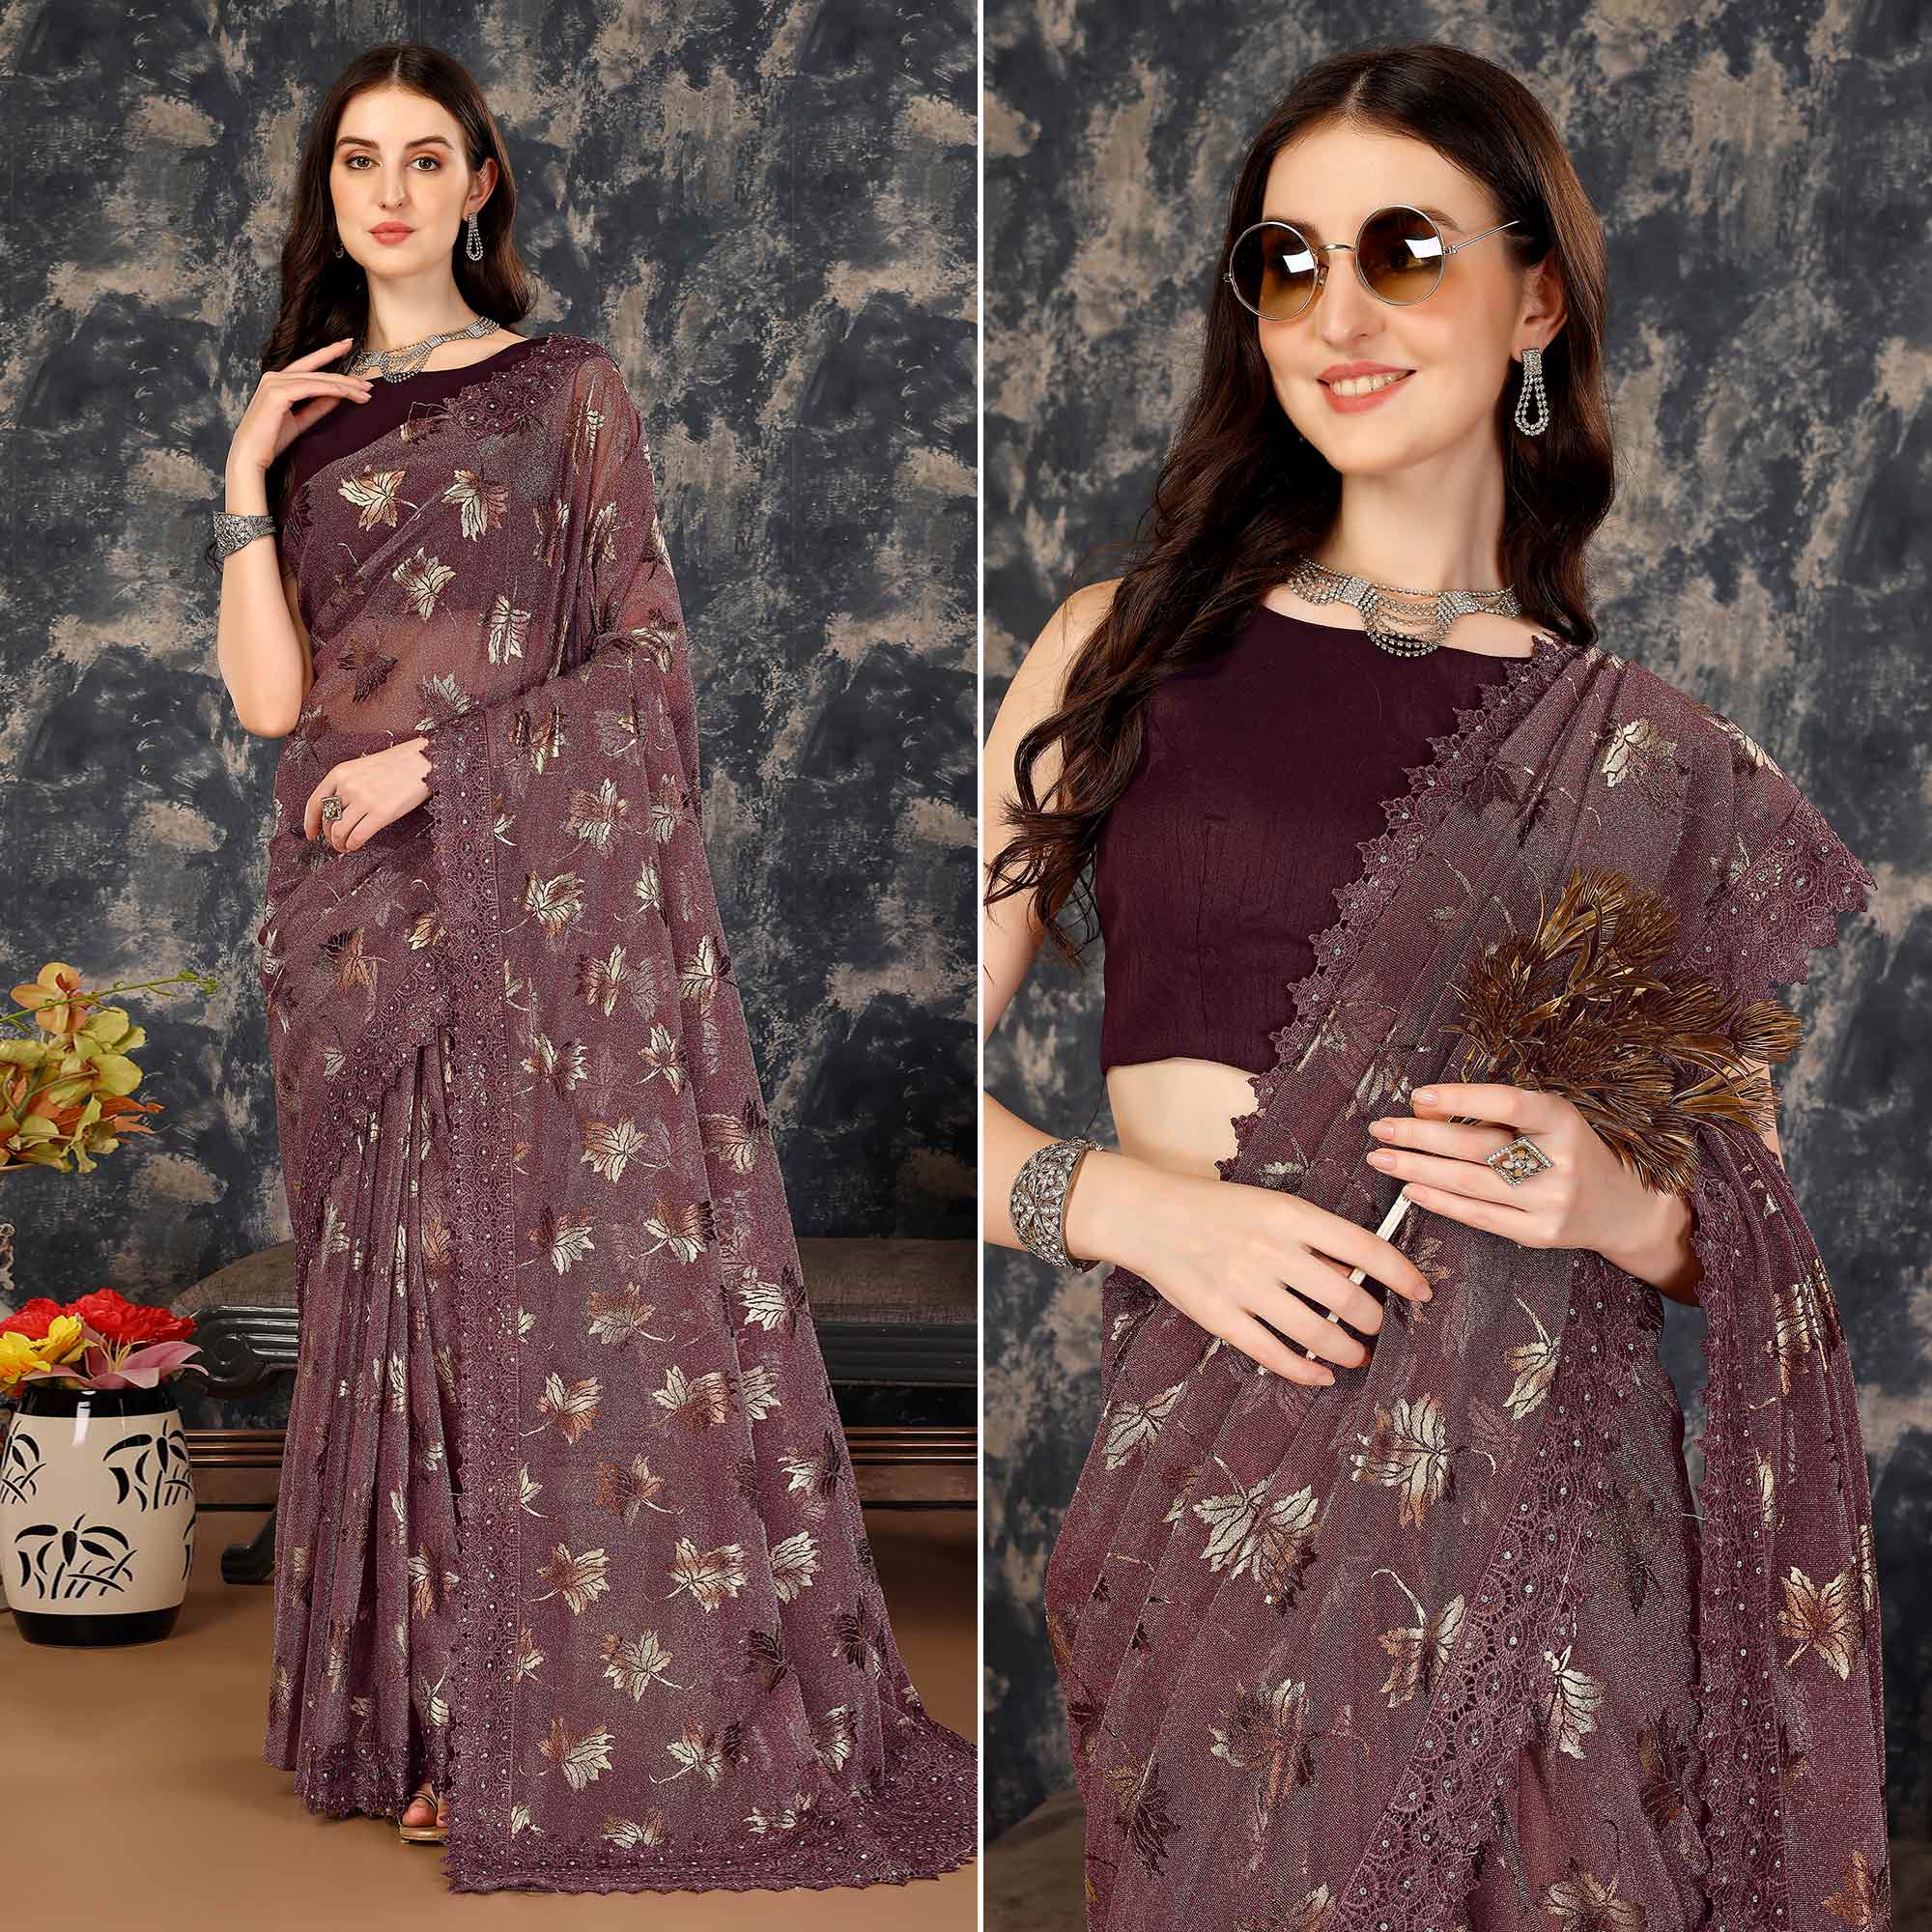 Dark Mauve Foil Printed Lycra Saree With Embroidered Lace Border